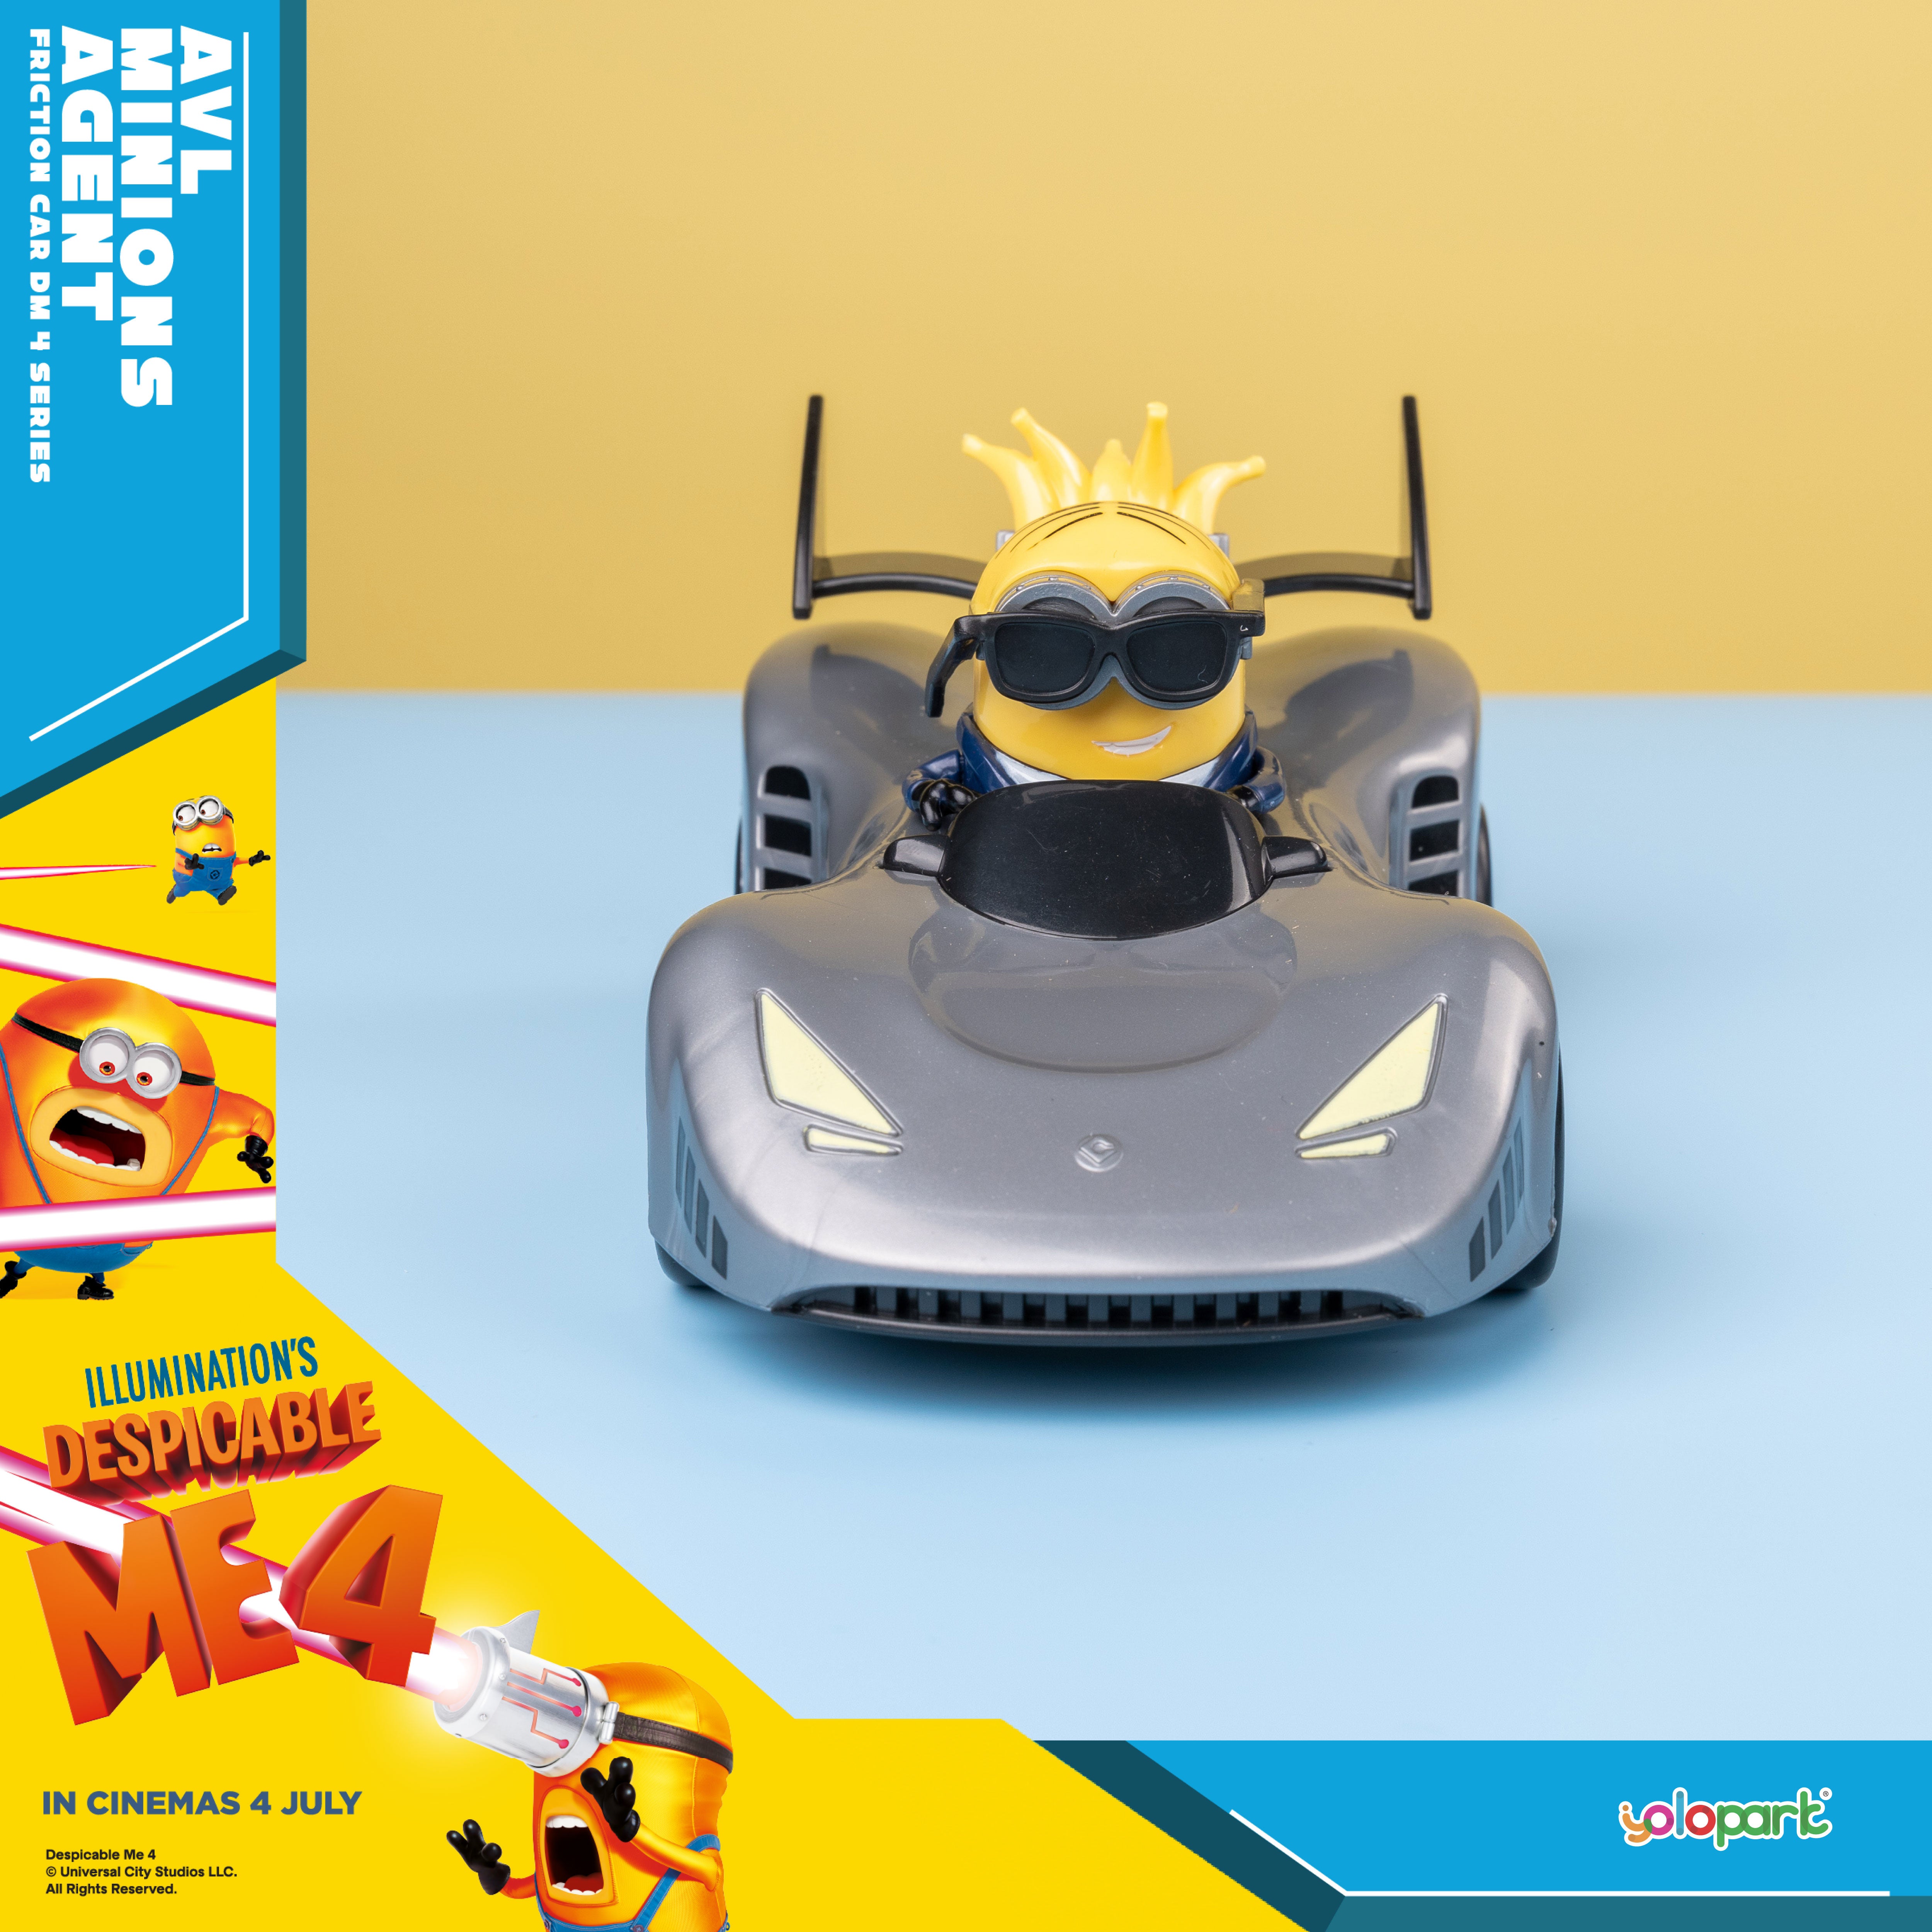 Despicable Me 4 - AVL Minions Agent - Friction Car - Yolopark